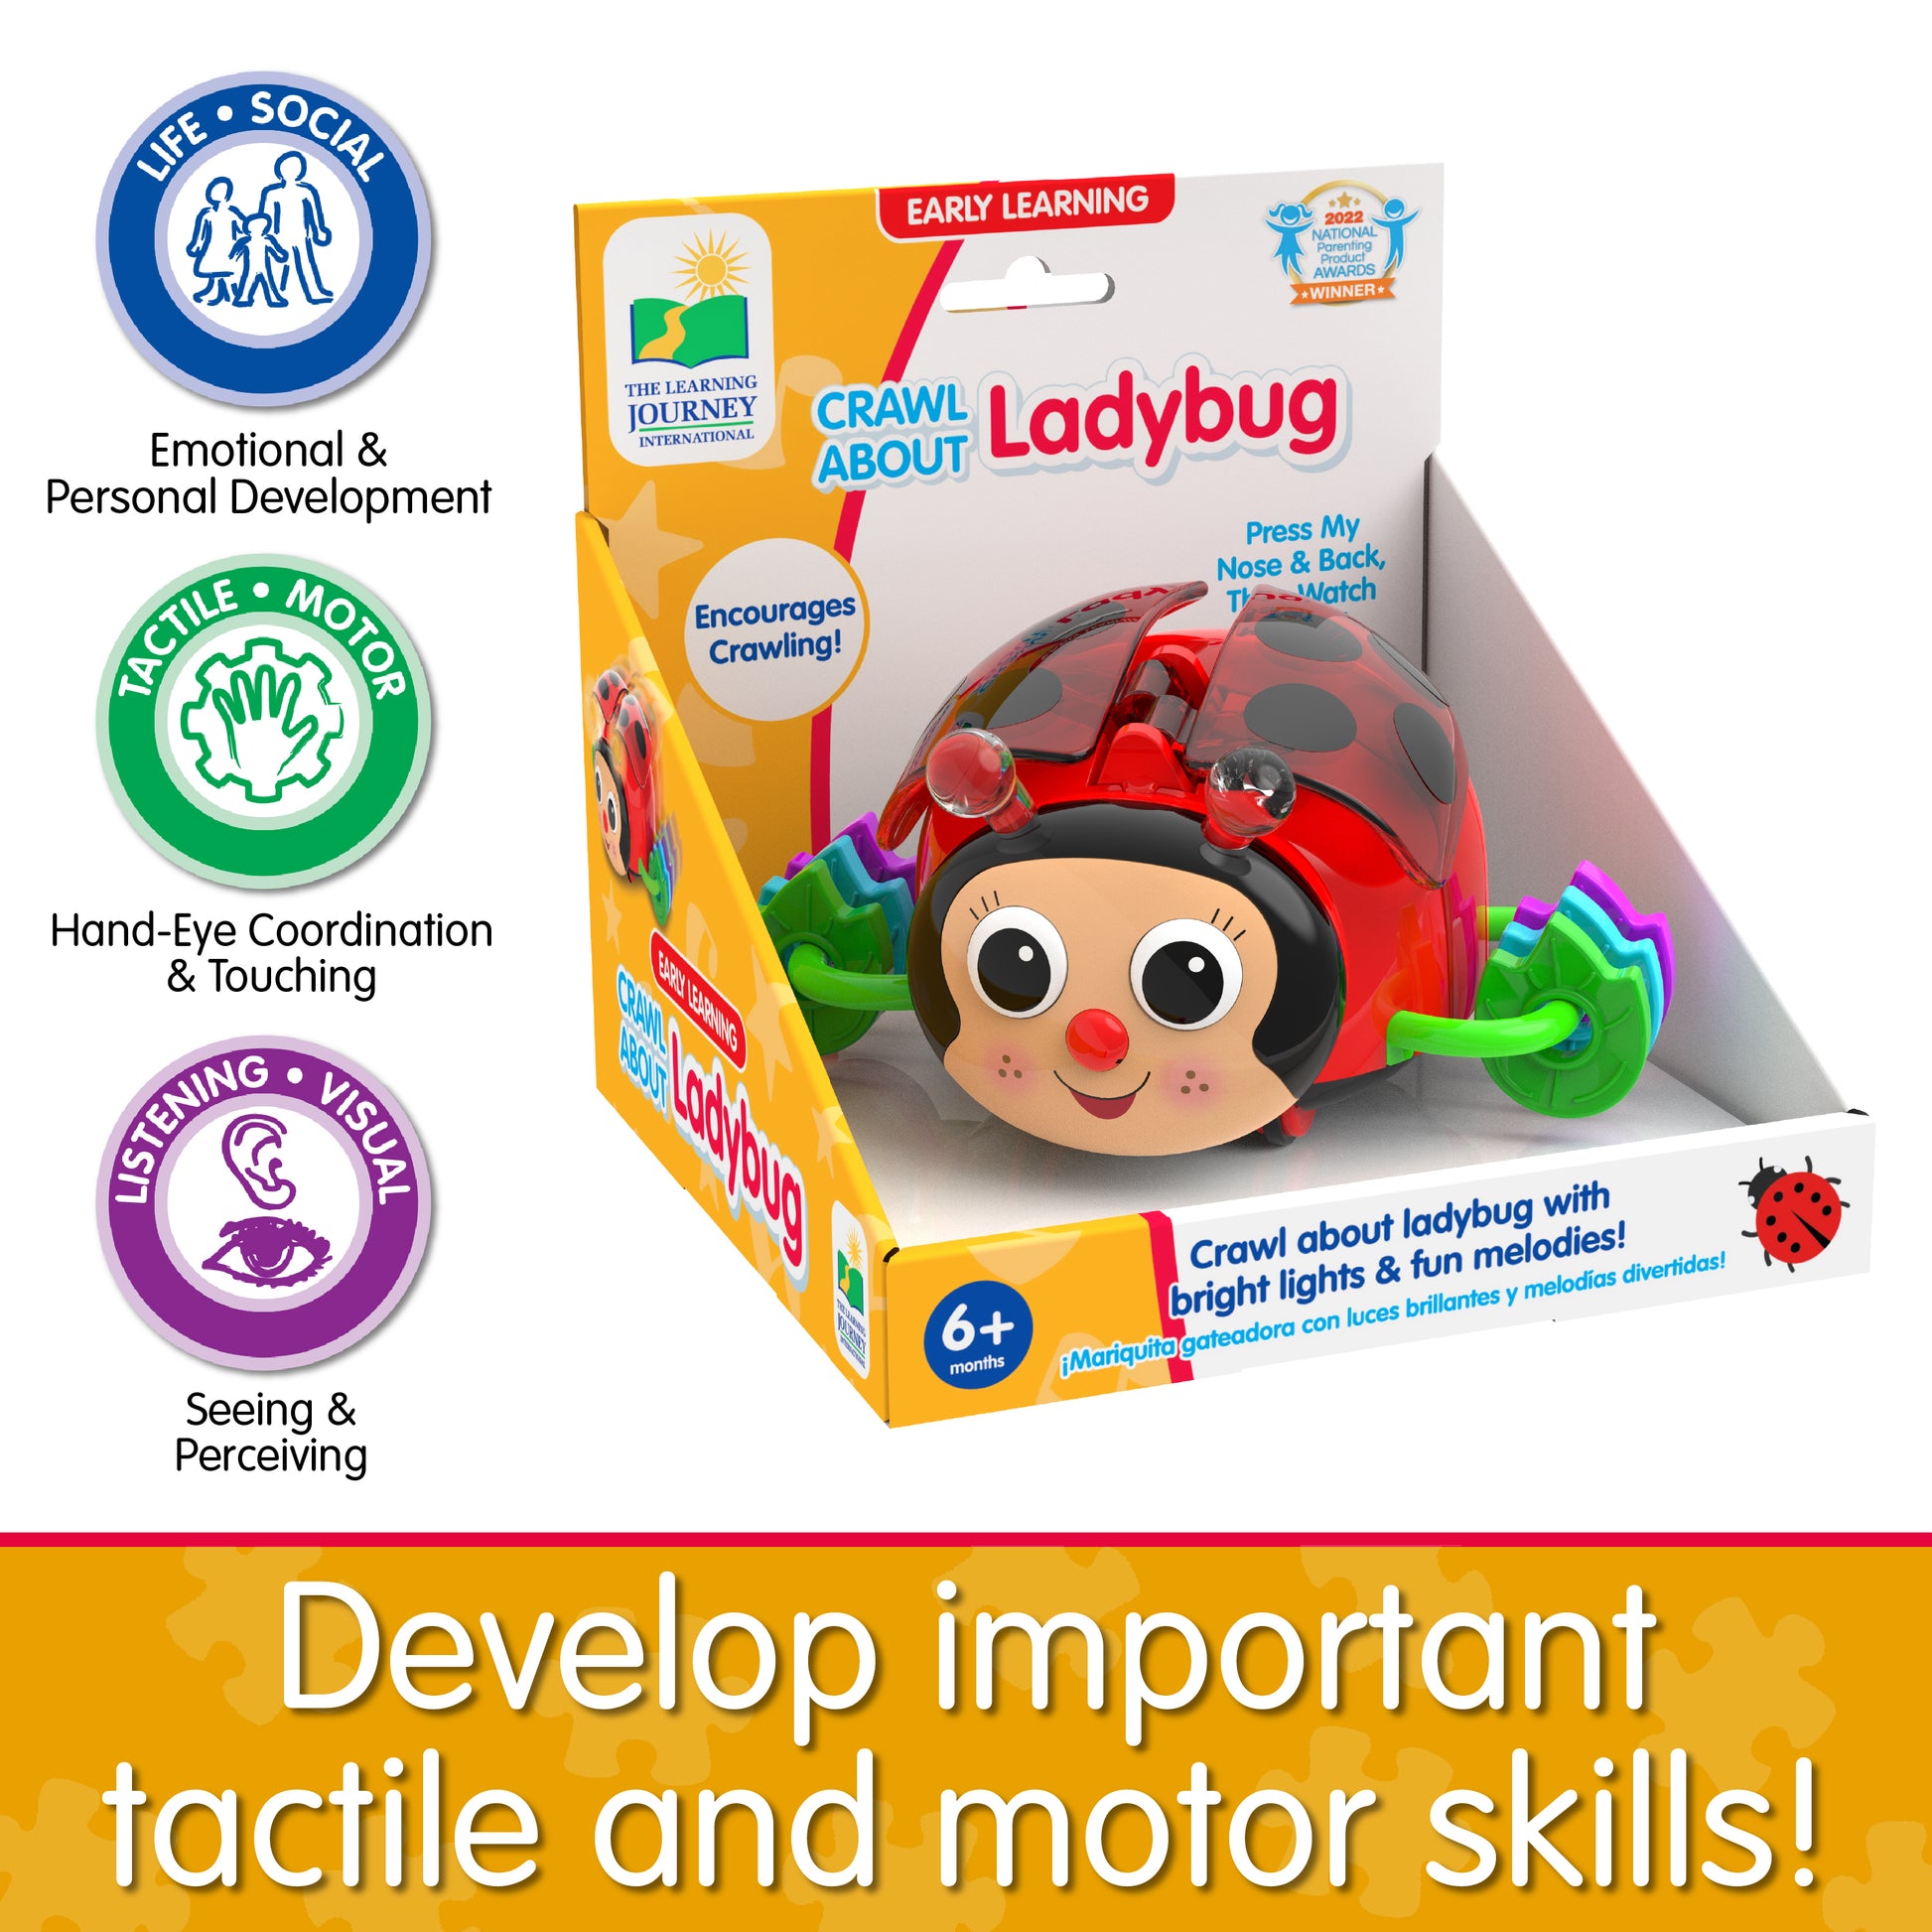 Infographic of Crawl About Ladybug's educational benefits that reads "Develop important tactile and motor skills!"